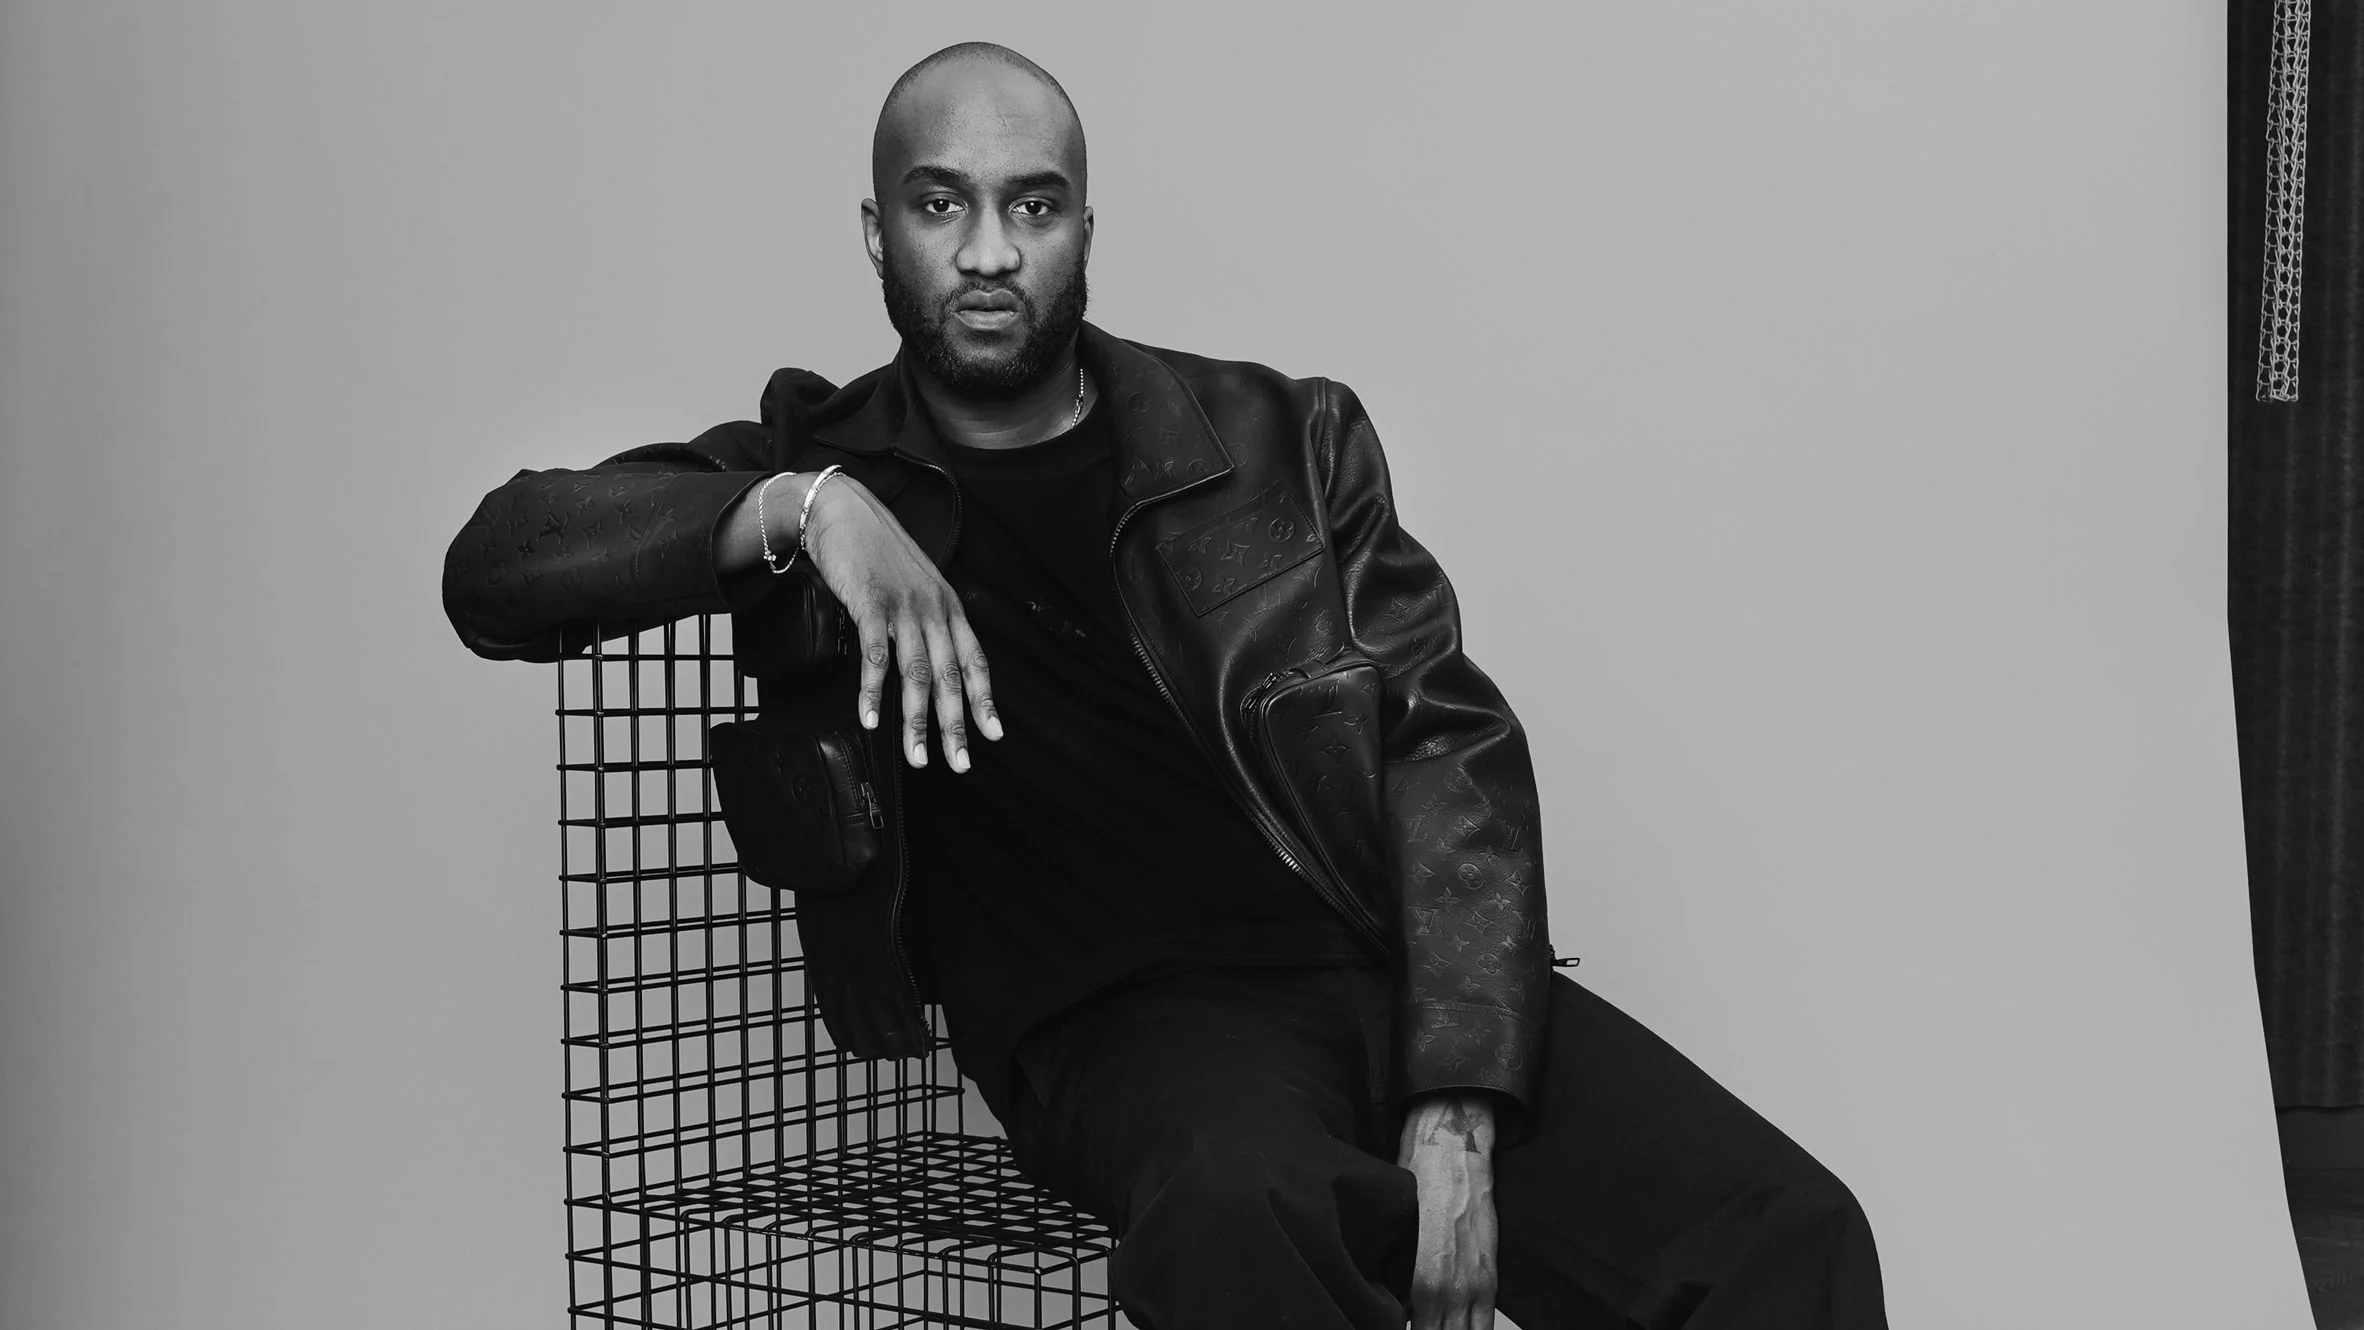 Co-founder of RSVP Gallery, Virgil Abloh is a fashion designer known for  creating luxury streetwear brand Off-White and as the artistic…